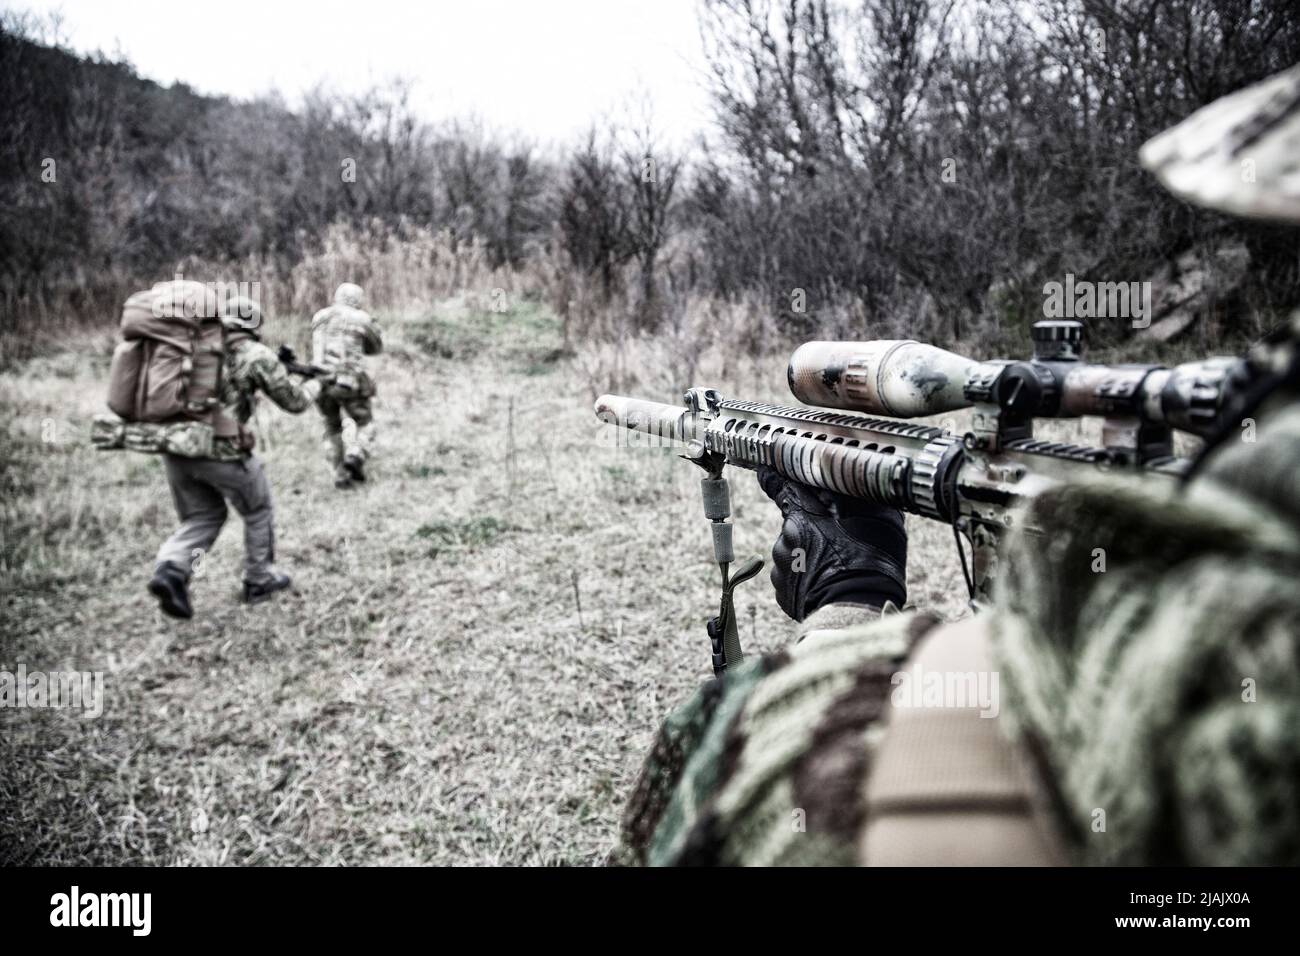 Over the shoulder view of a marksman covering comrades rushing through the woodlands. Stock Photo